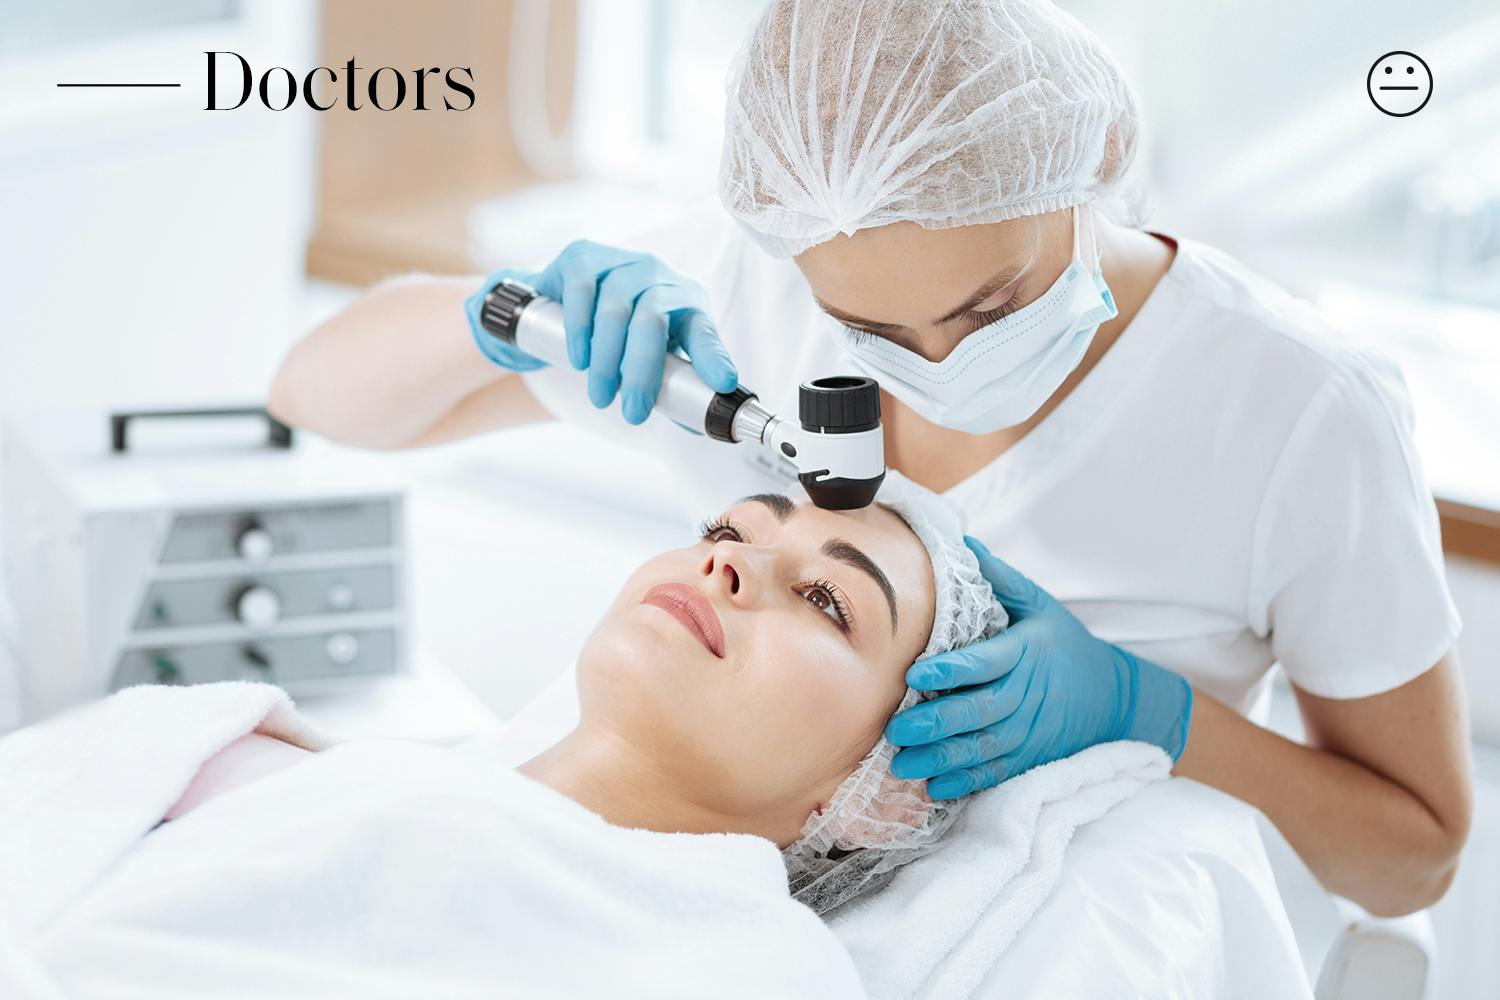 What is the doctor's opinion about microblading & permanent makeup